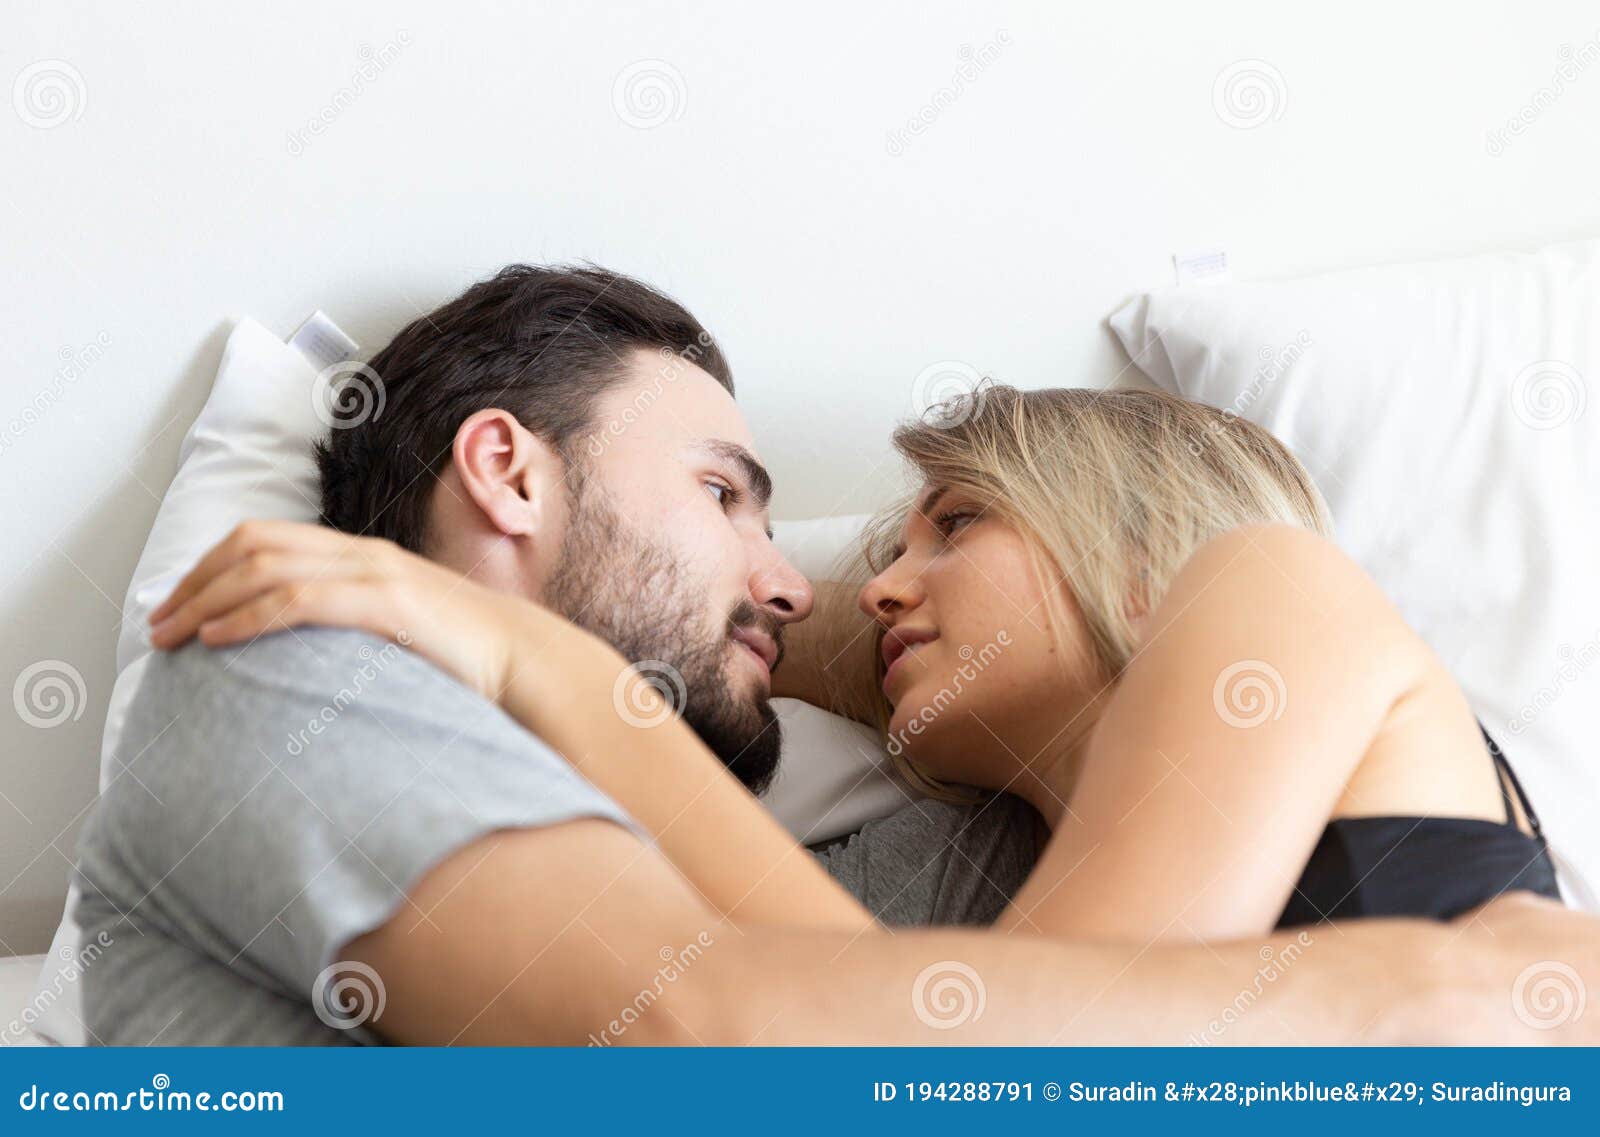 Young Cute Couple Hug and Sleep Together in Bed Stock Image ...